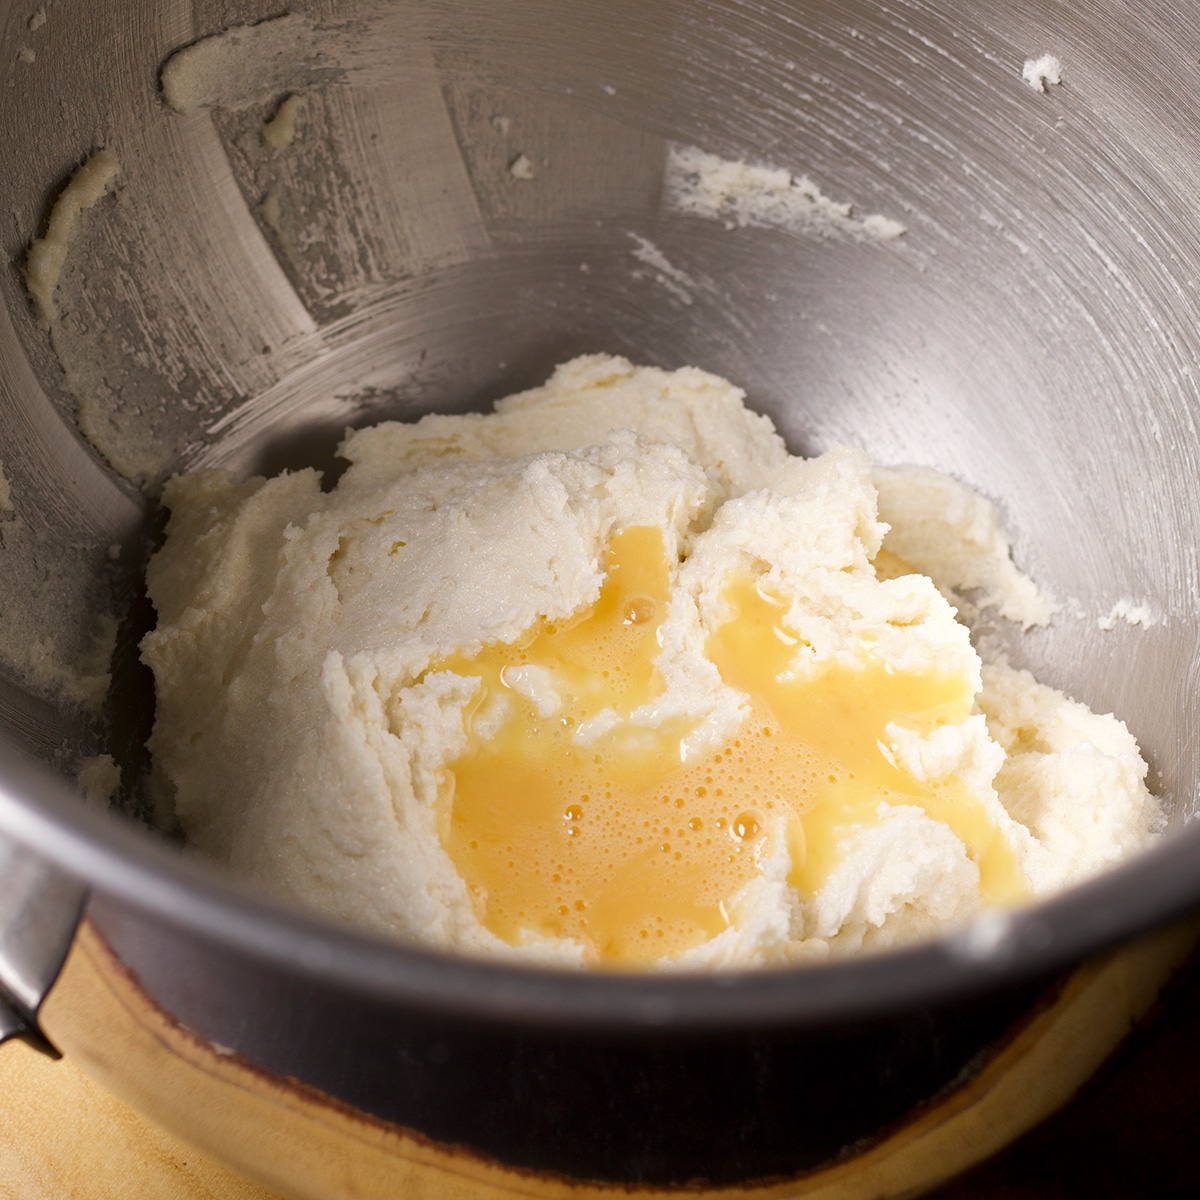 Beaten eggs that have been poured into a bowl containing butter and sugar.